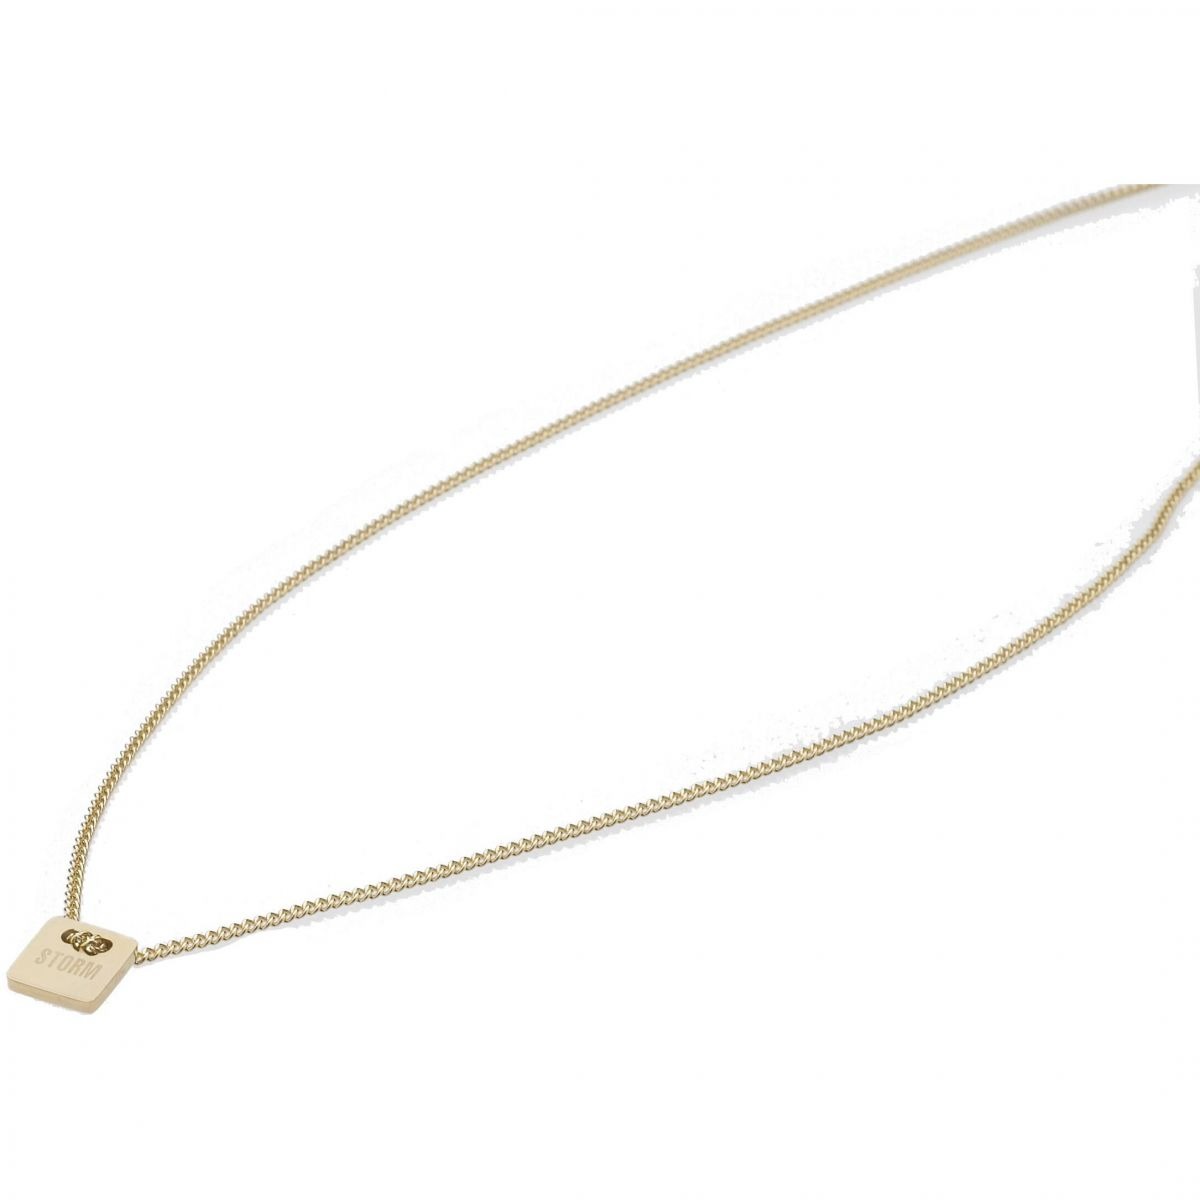 Storm - Women's Necklace in Gold from Watch Shop GOOFASH